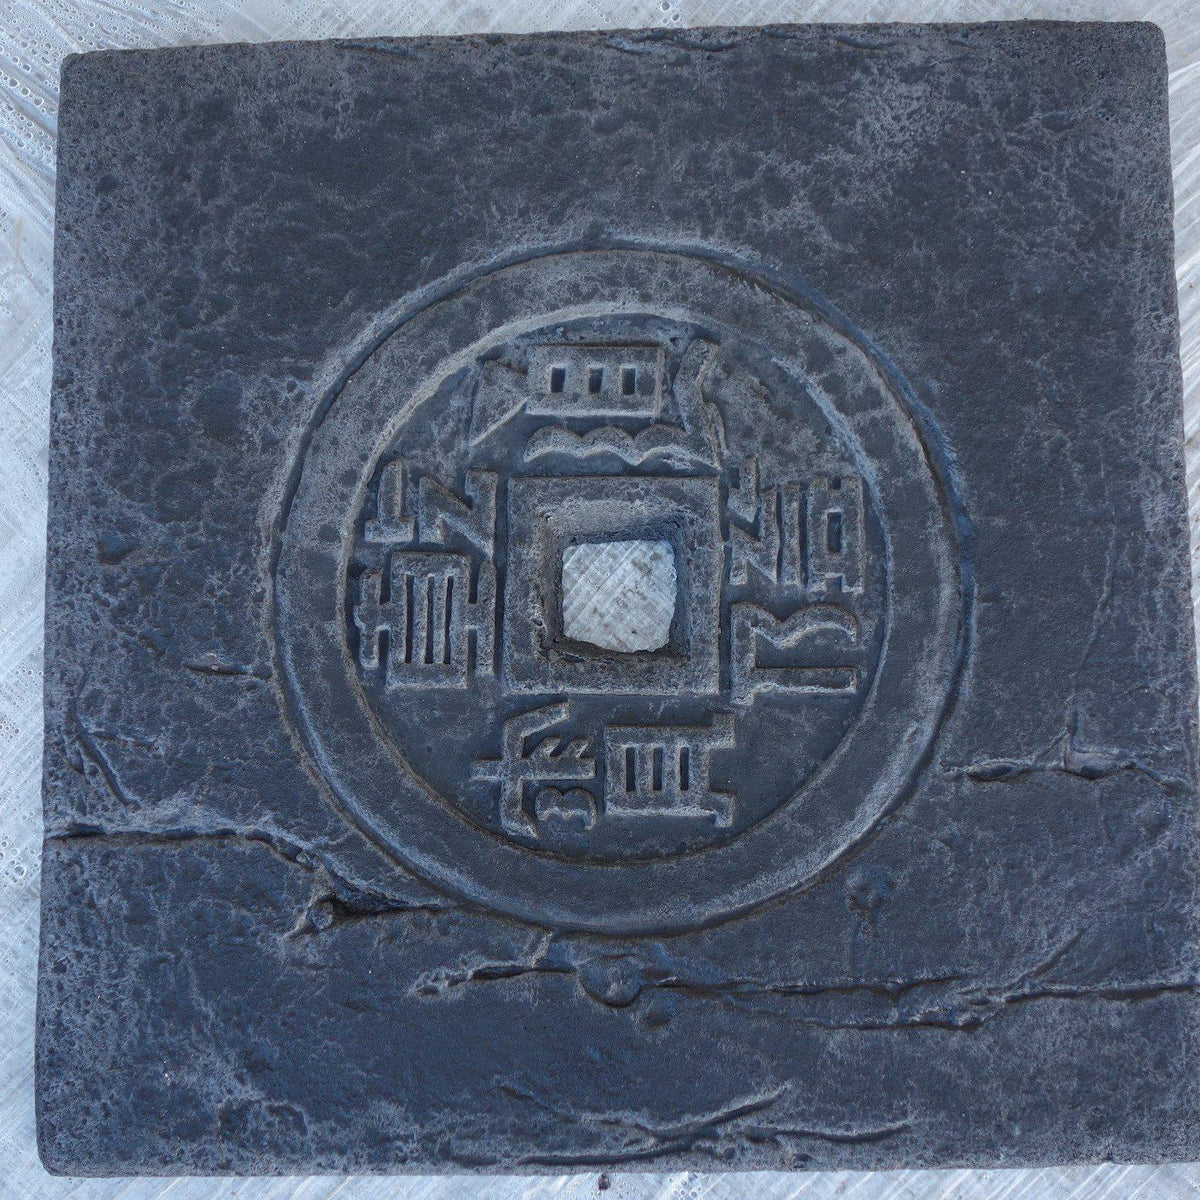 Gumnut Feng Shui Square Coin Paver